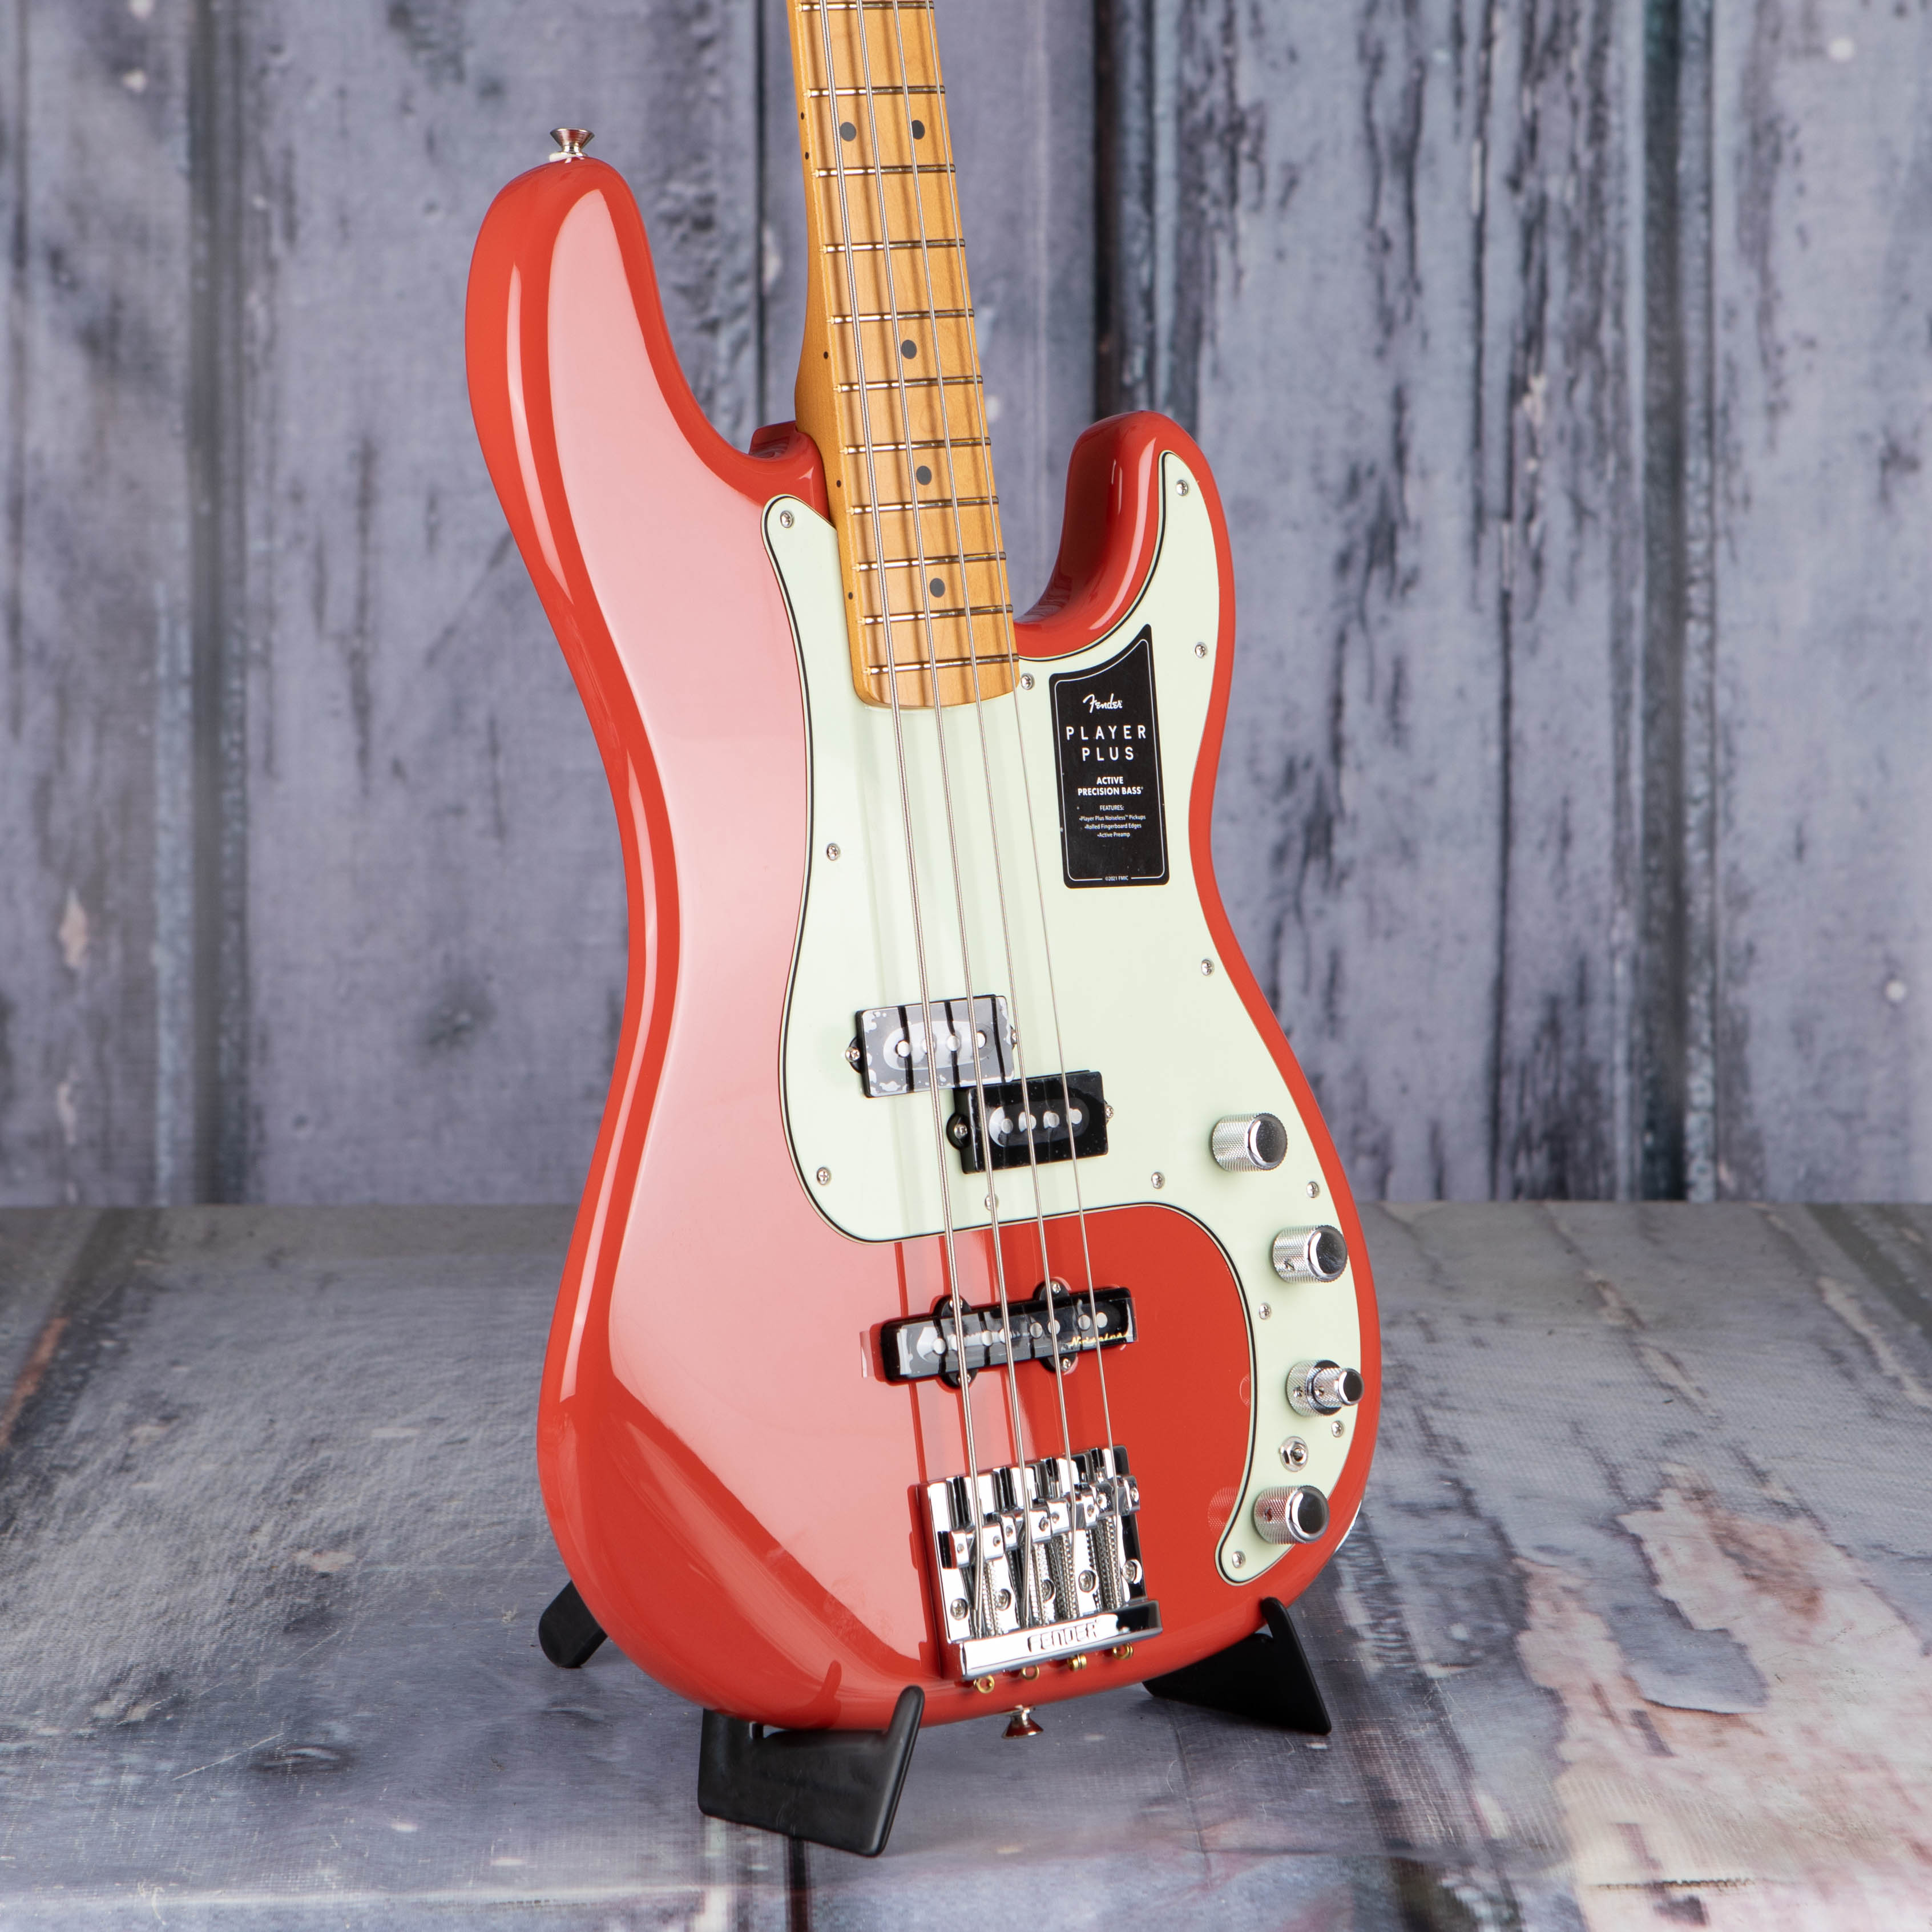 Fender Player Plus Precision Bass Guitar, Fiesta Red, angle